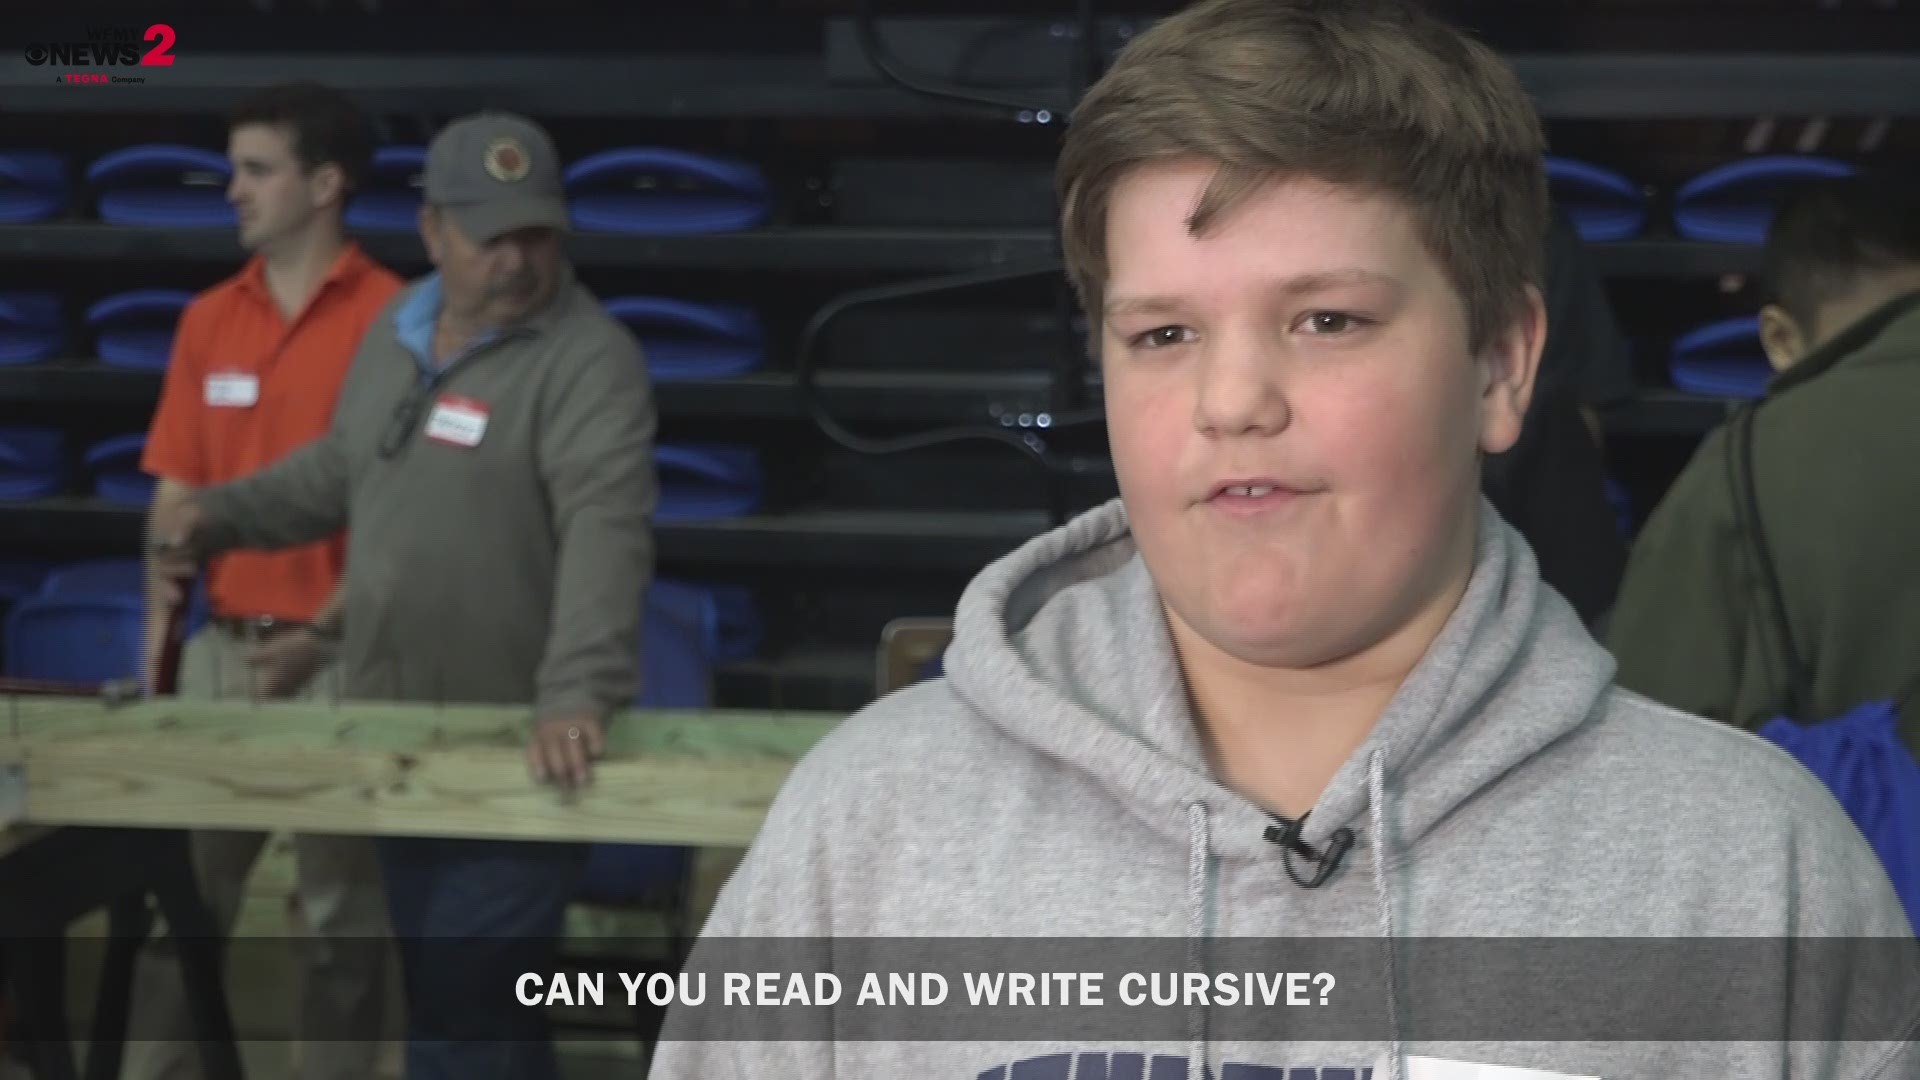 We asked some 8th graders about their ability to write and read cursive writing. Here's what they had to say.